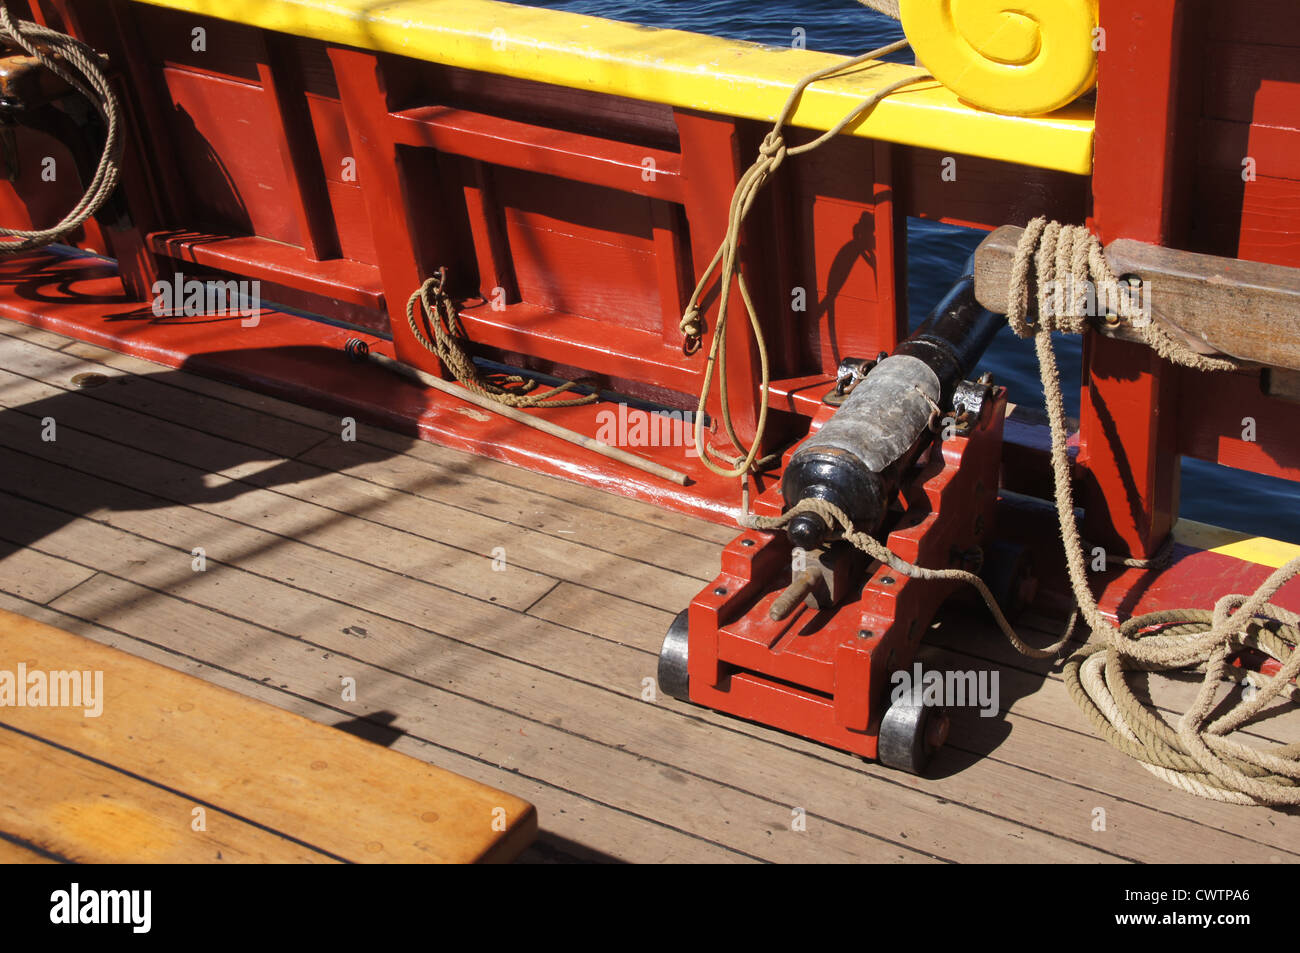 Small naval cannon on board historical wooden brig  Stock Photo